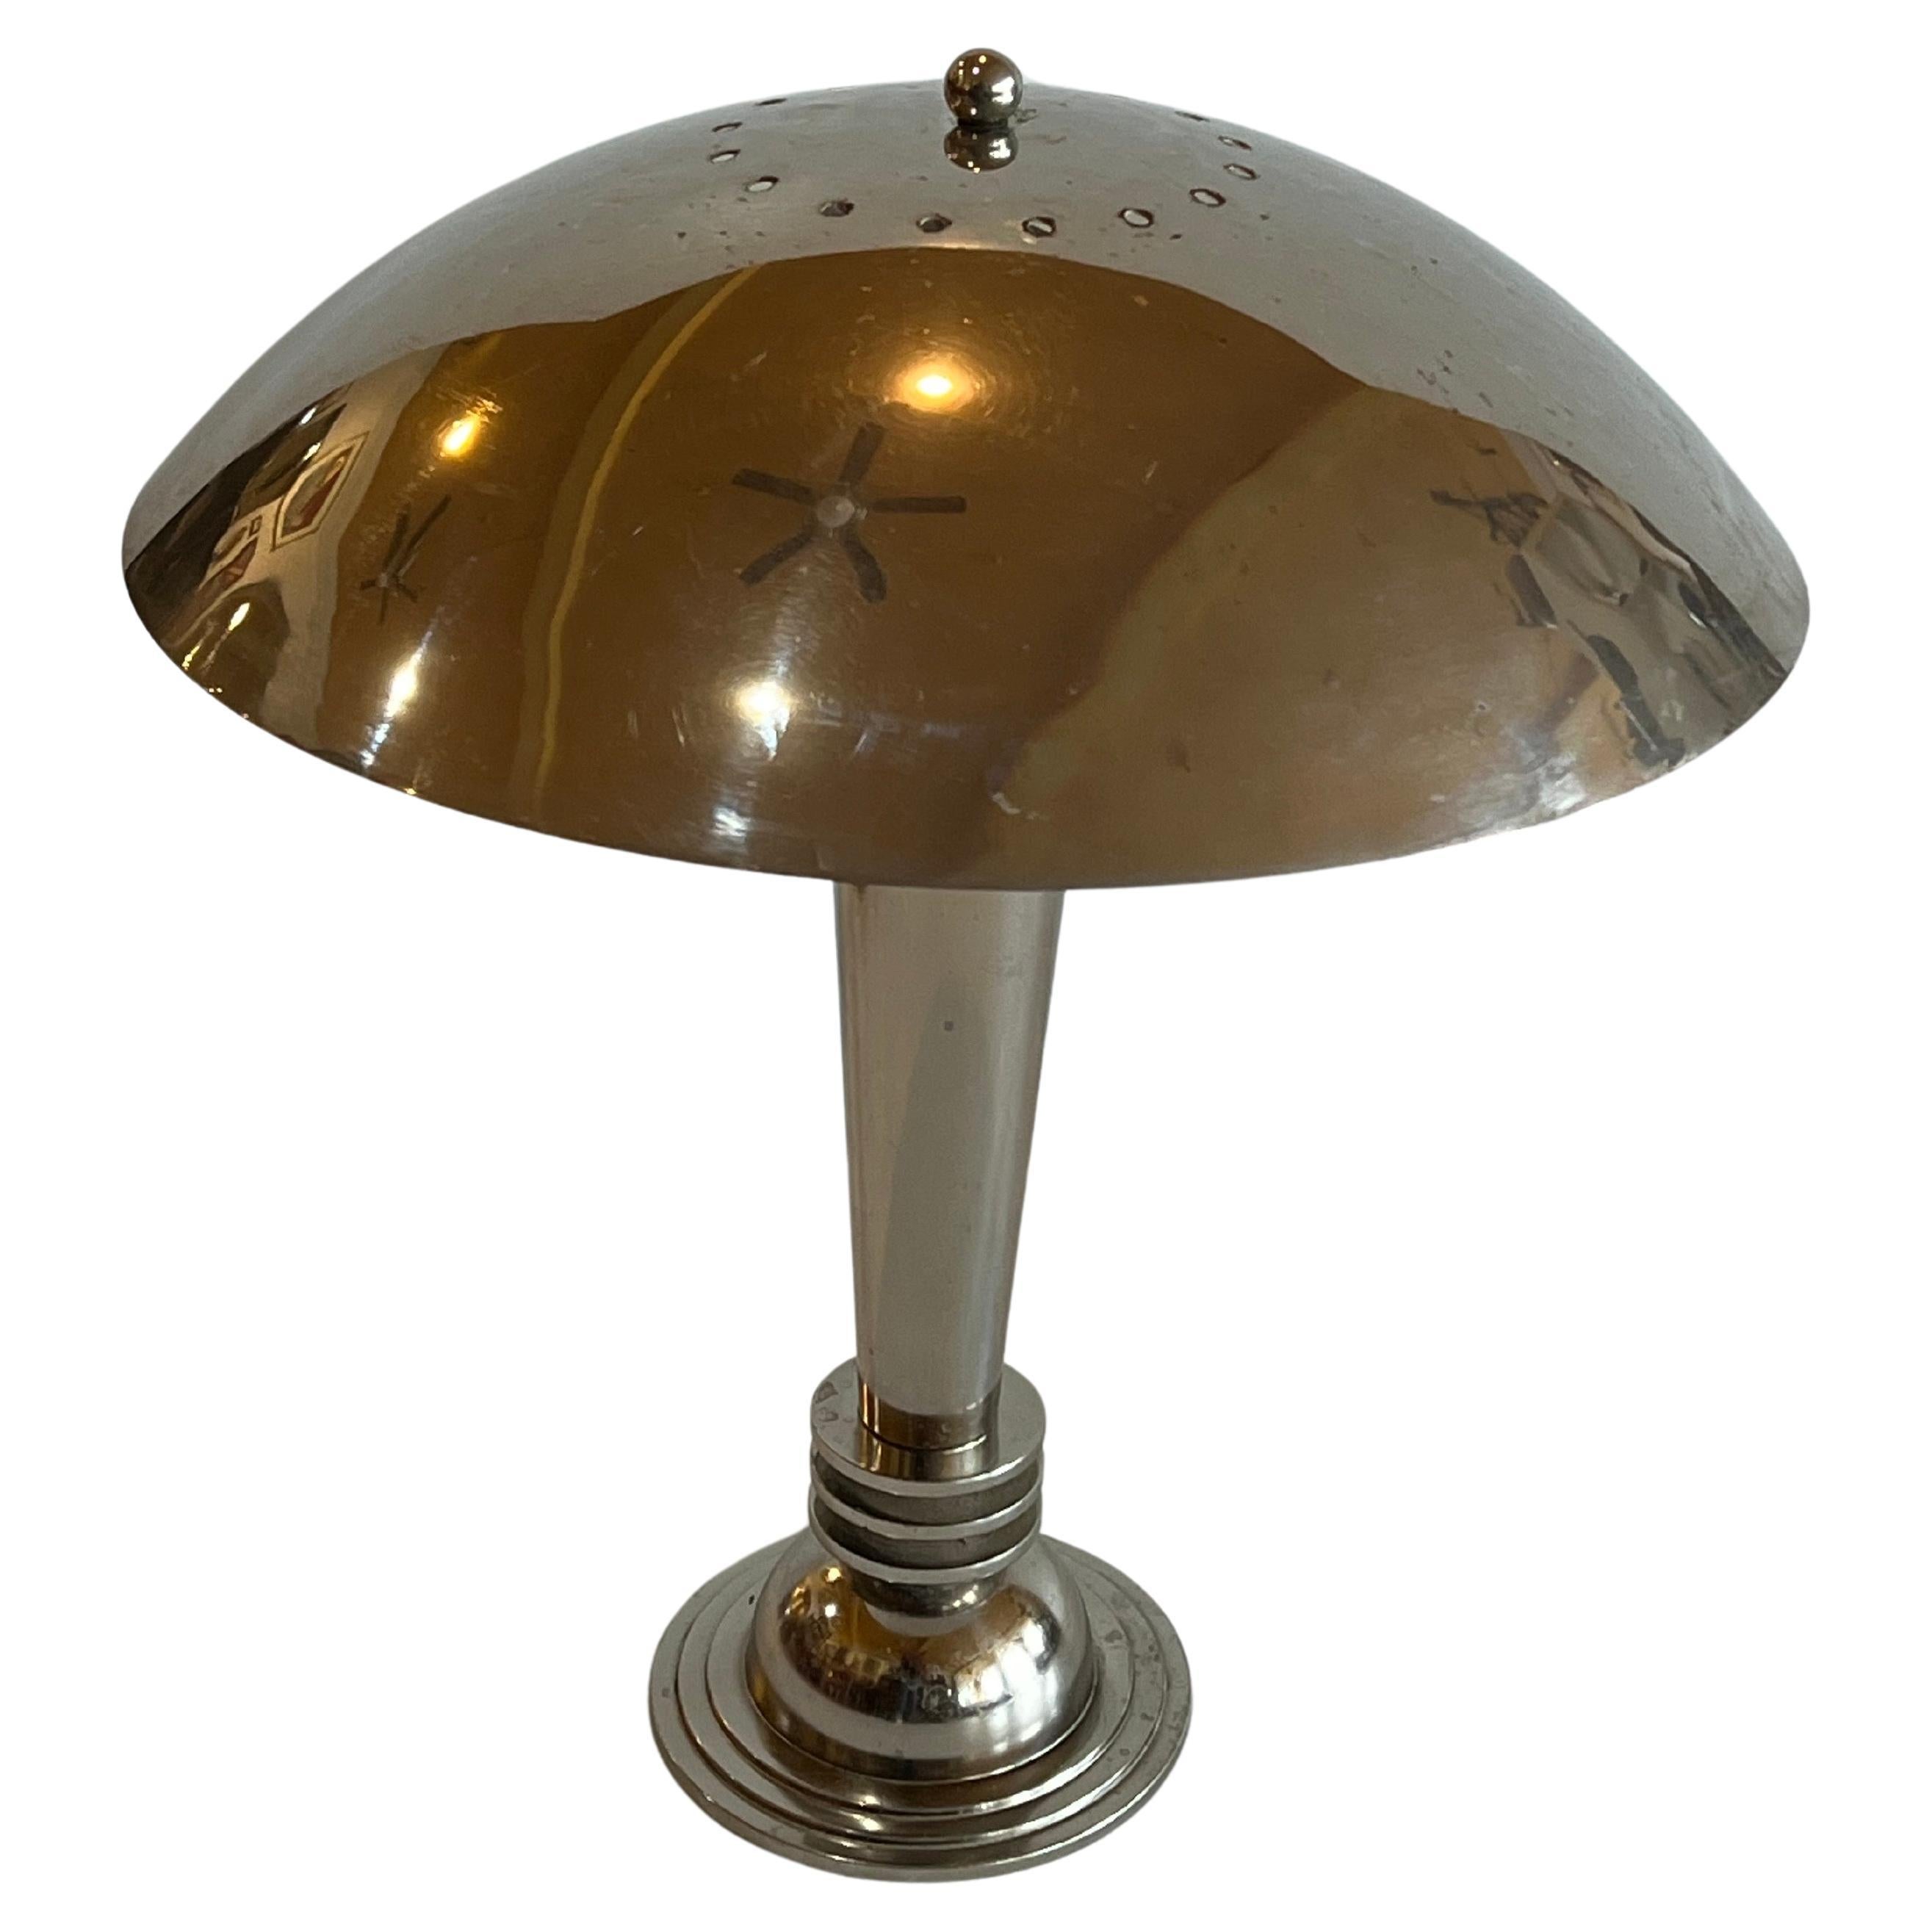 Austrian Art Deco Machine Age Majestic Nickel Plated Desk Table Lamp by Woka Lamps  For Sale